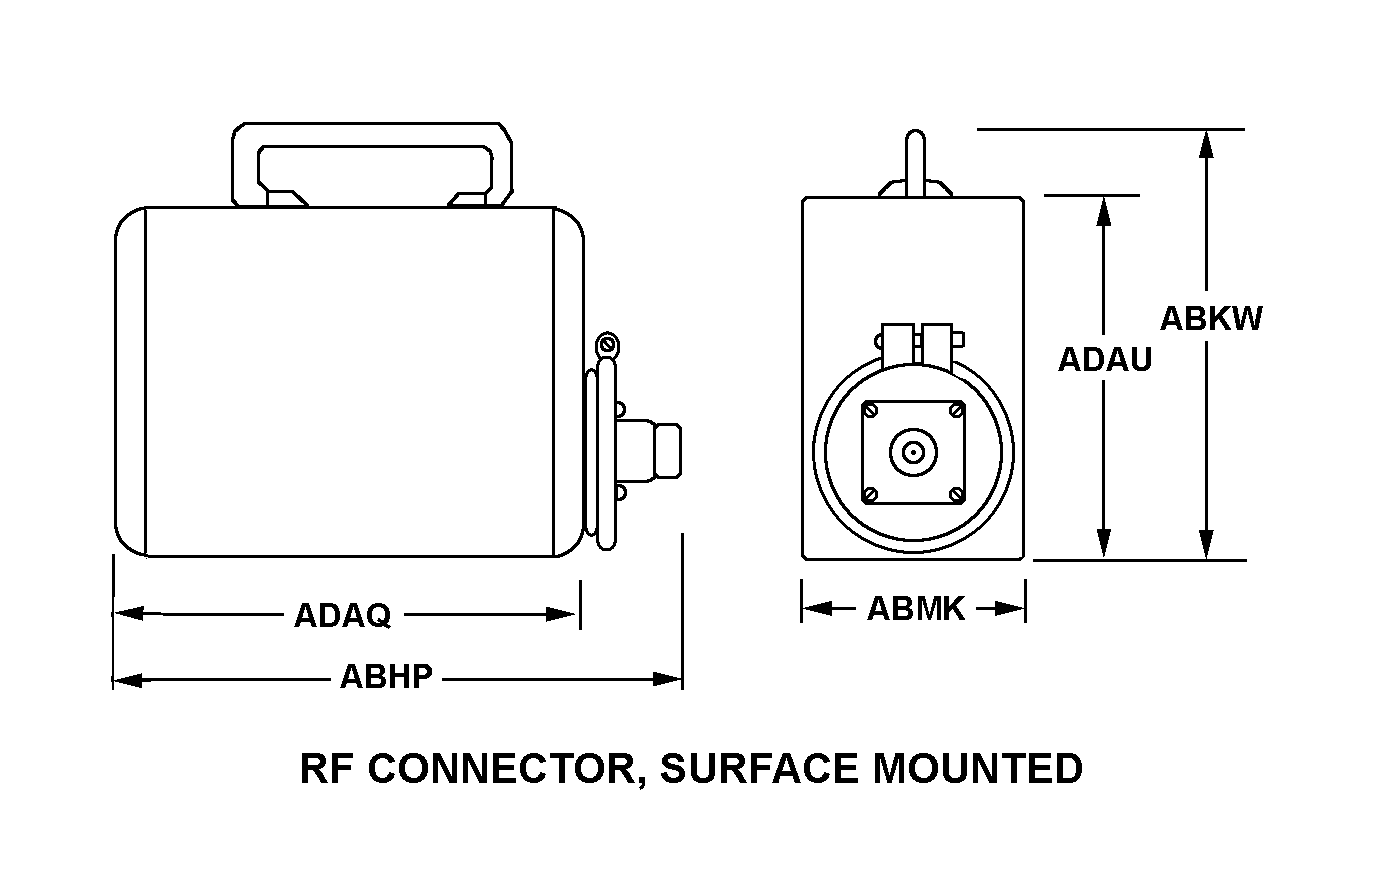 RF CONNECTOR, SURFACE MOUNTED style nsn 5985-01-005-6958